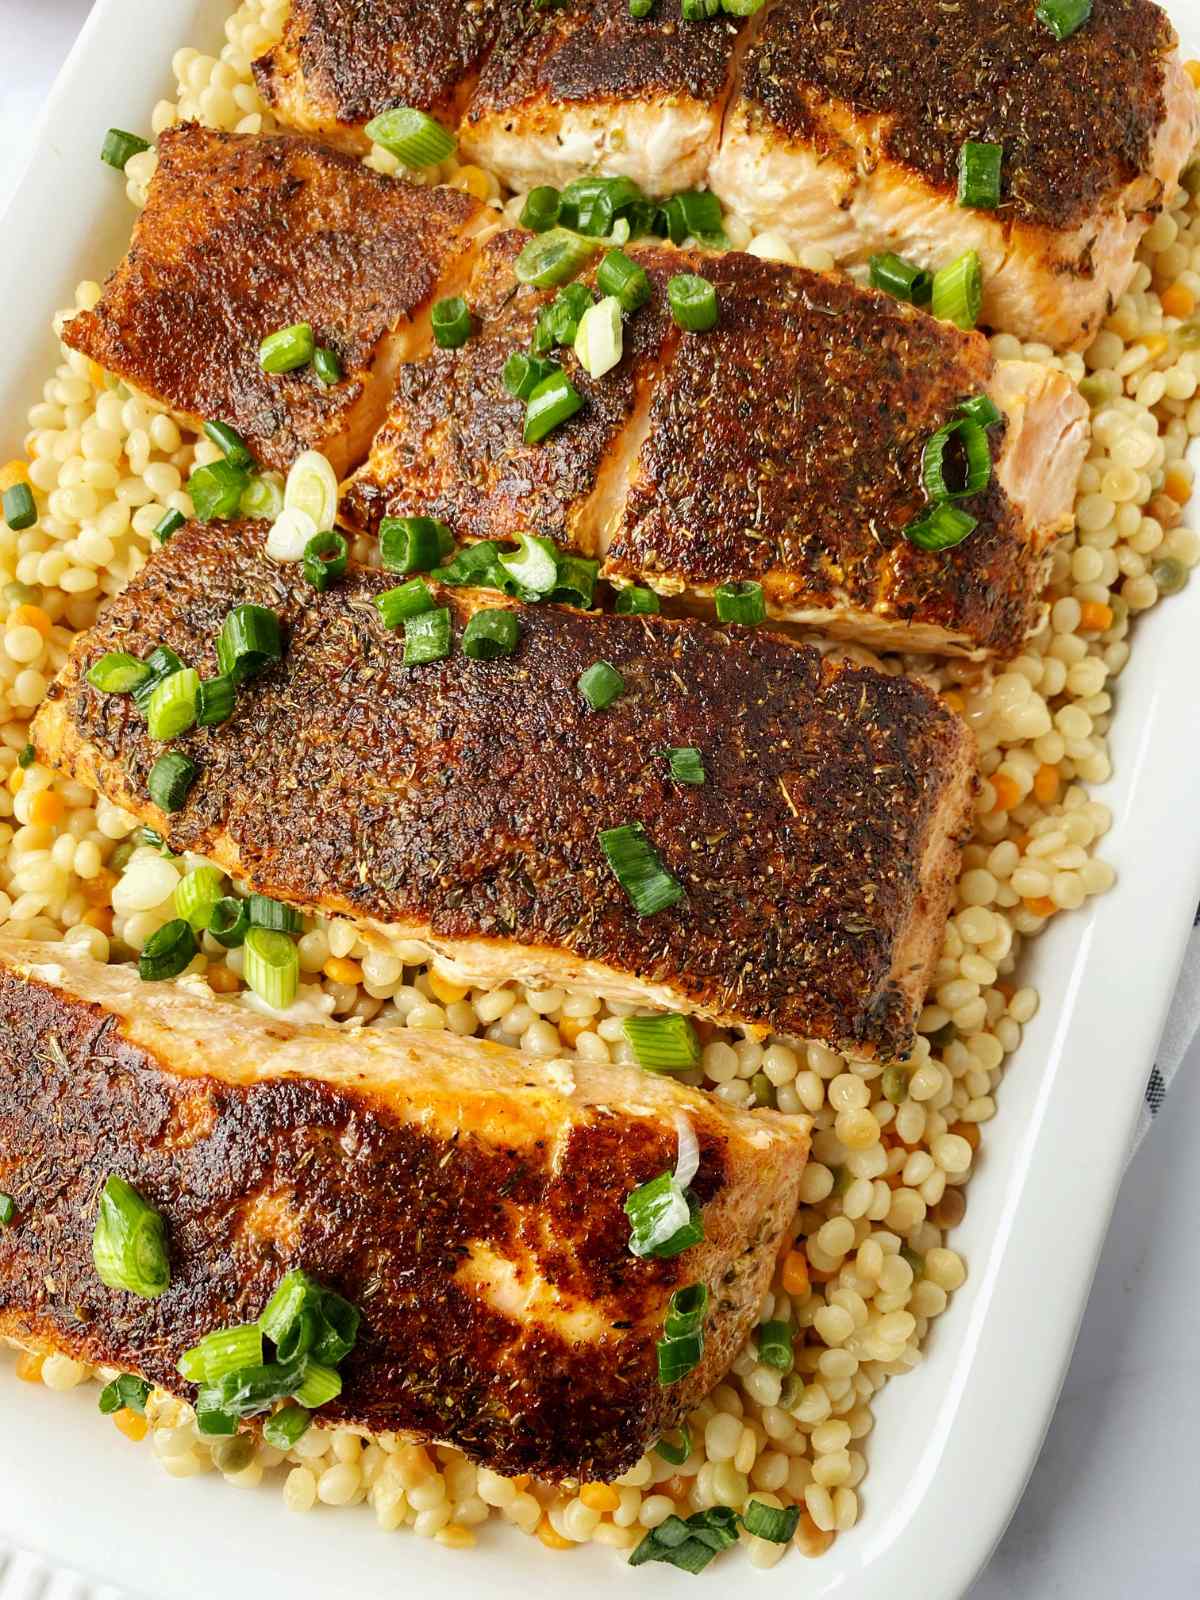 blackened salmon on a bed of couscous on a white platter.